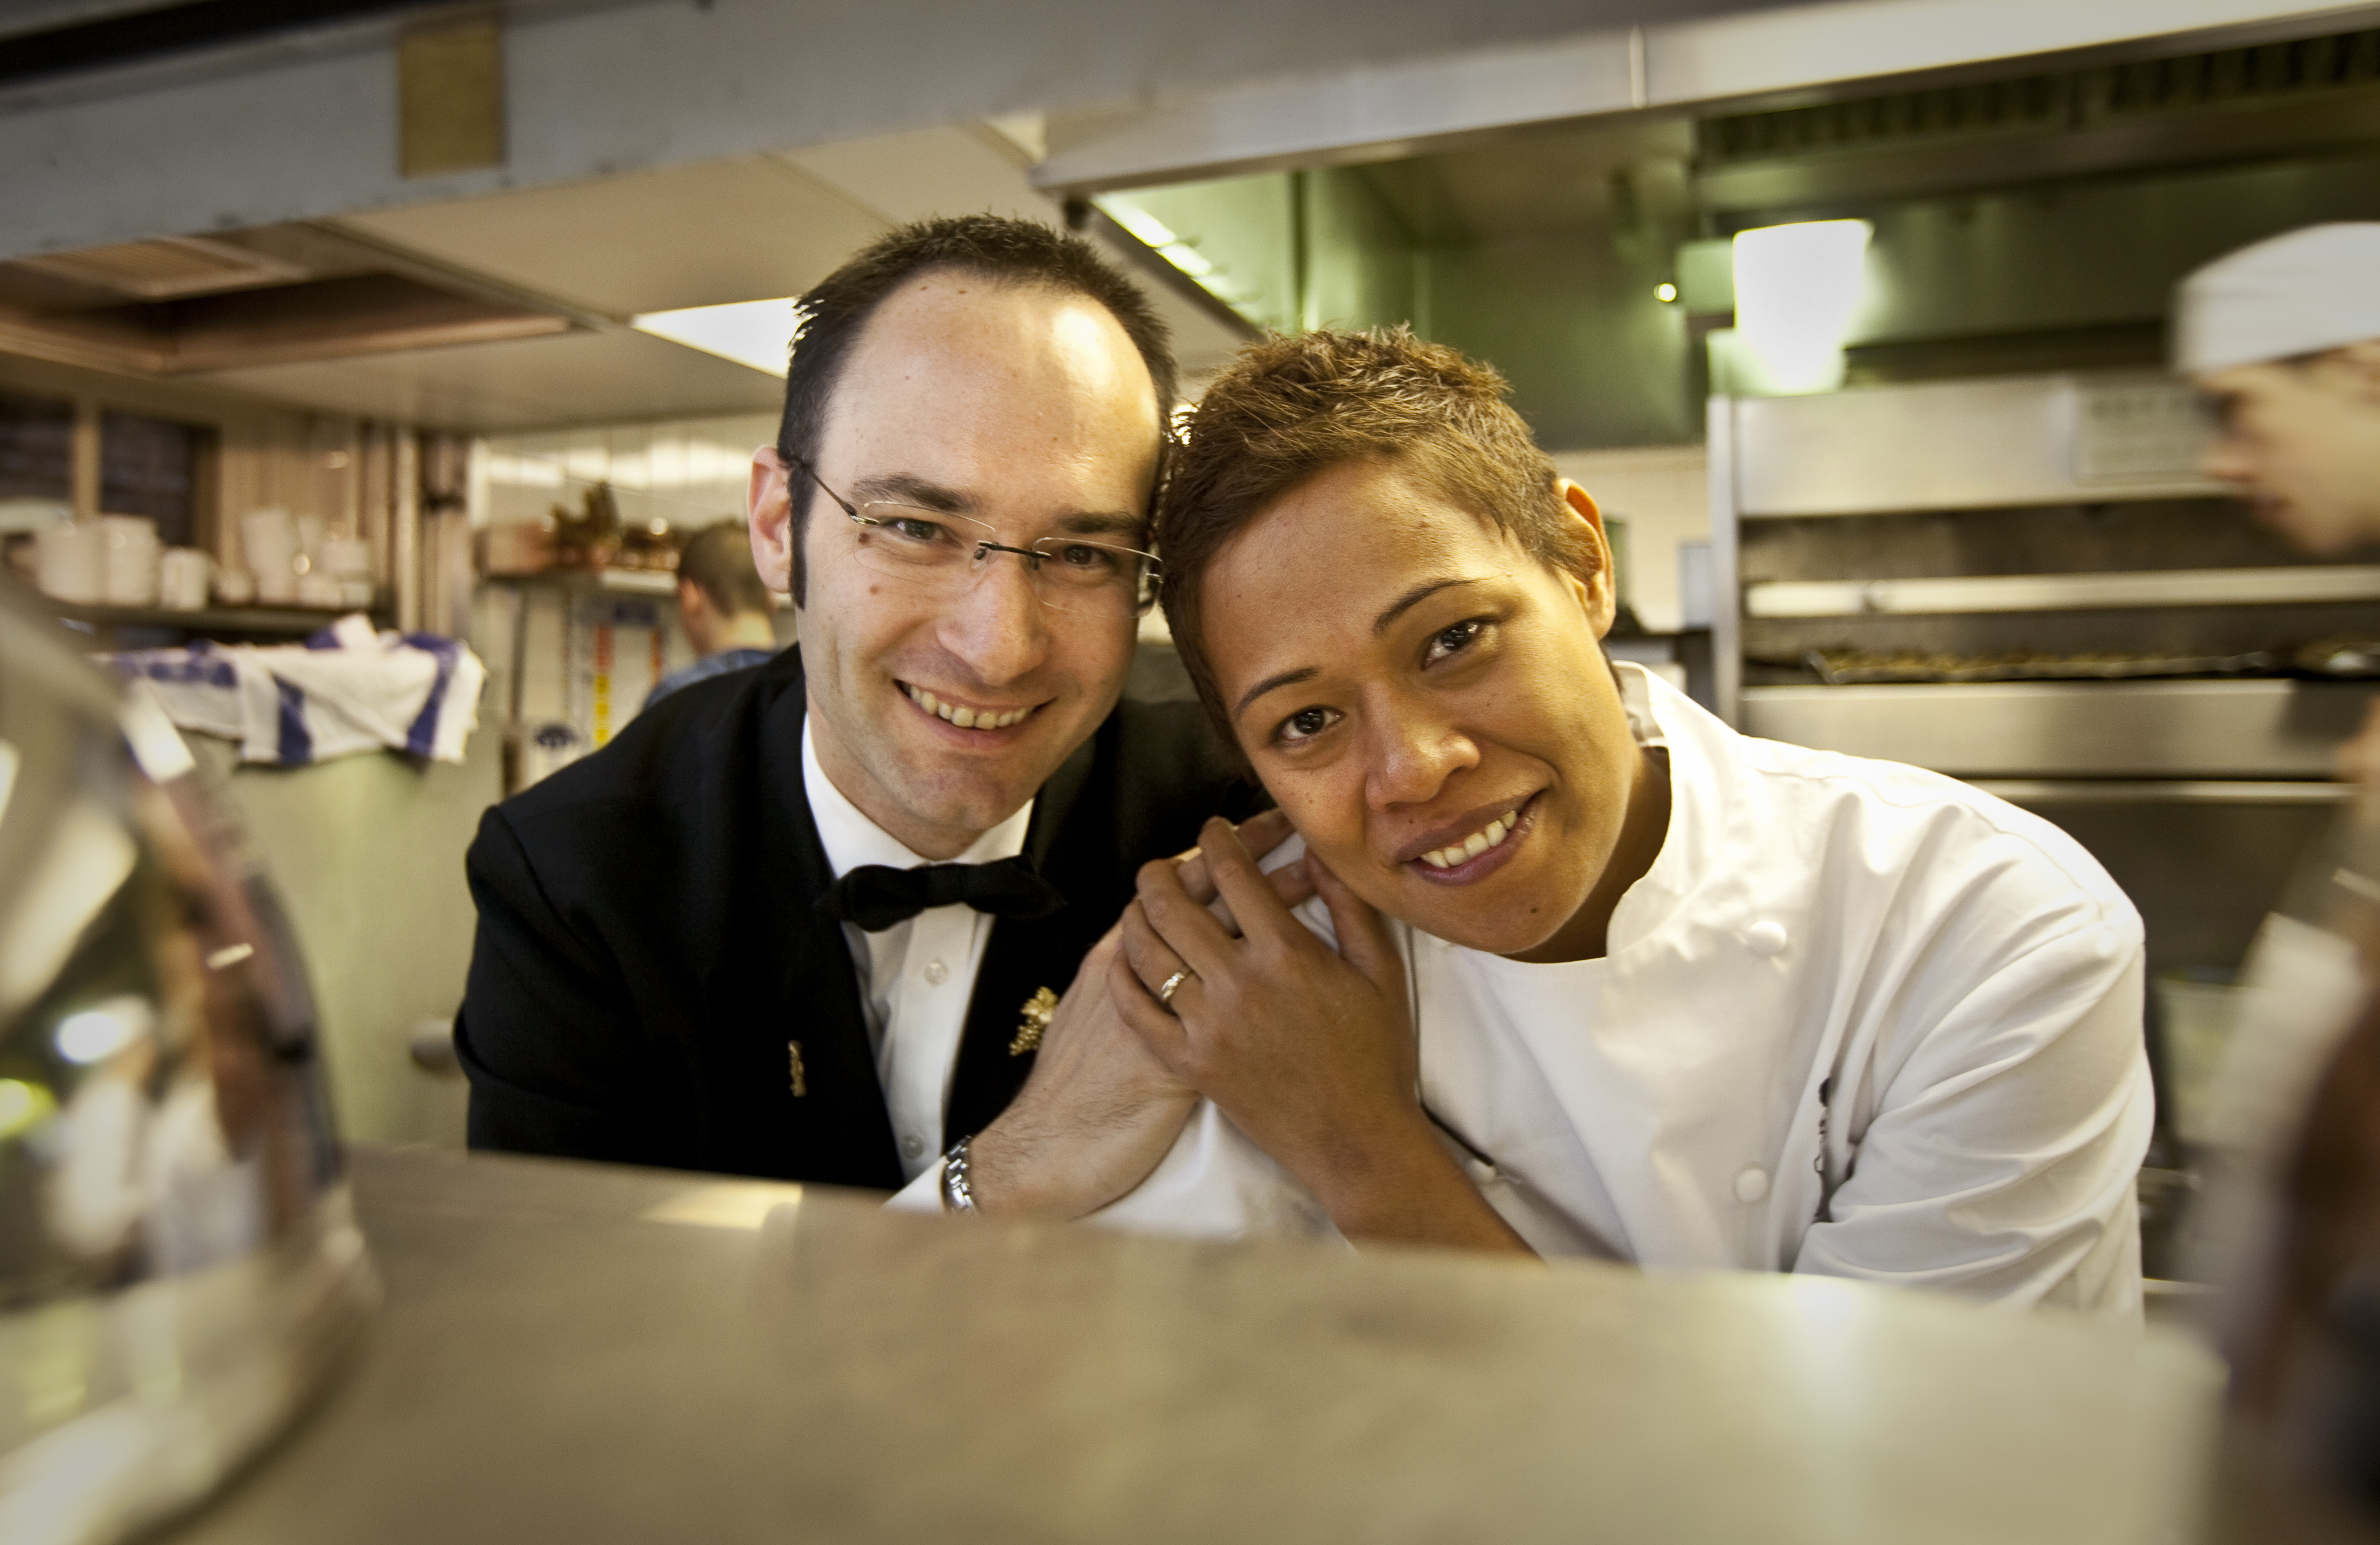 MasterChef judge Monic Galetti and her partner David Galetti have announced they are closing their restaurant Mere